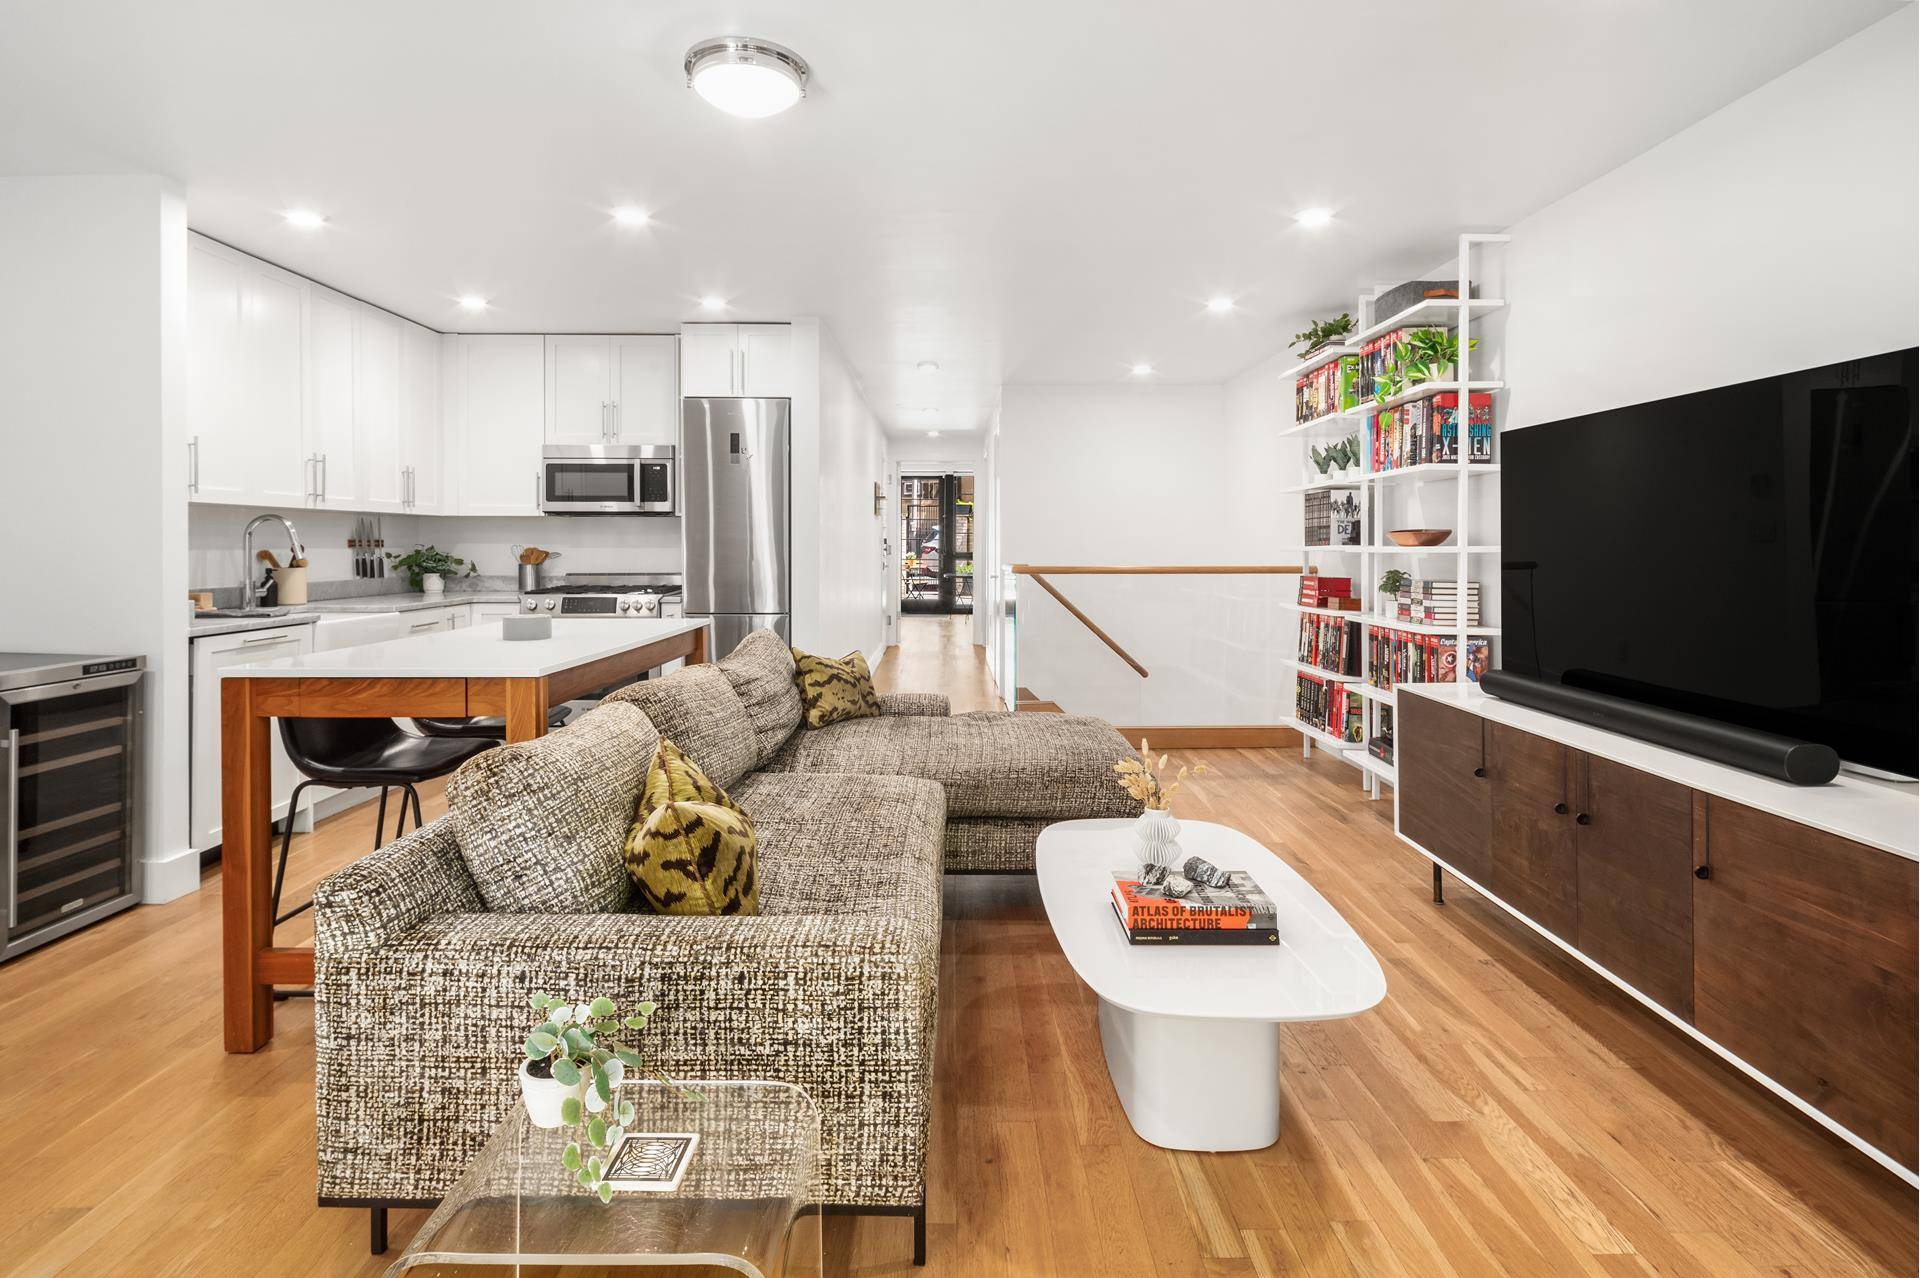 Welcome to Residence No. 1A at 340 Dean Street, a spacious duplex condominium in the heart of Boerum Hill.